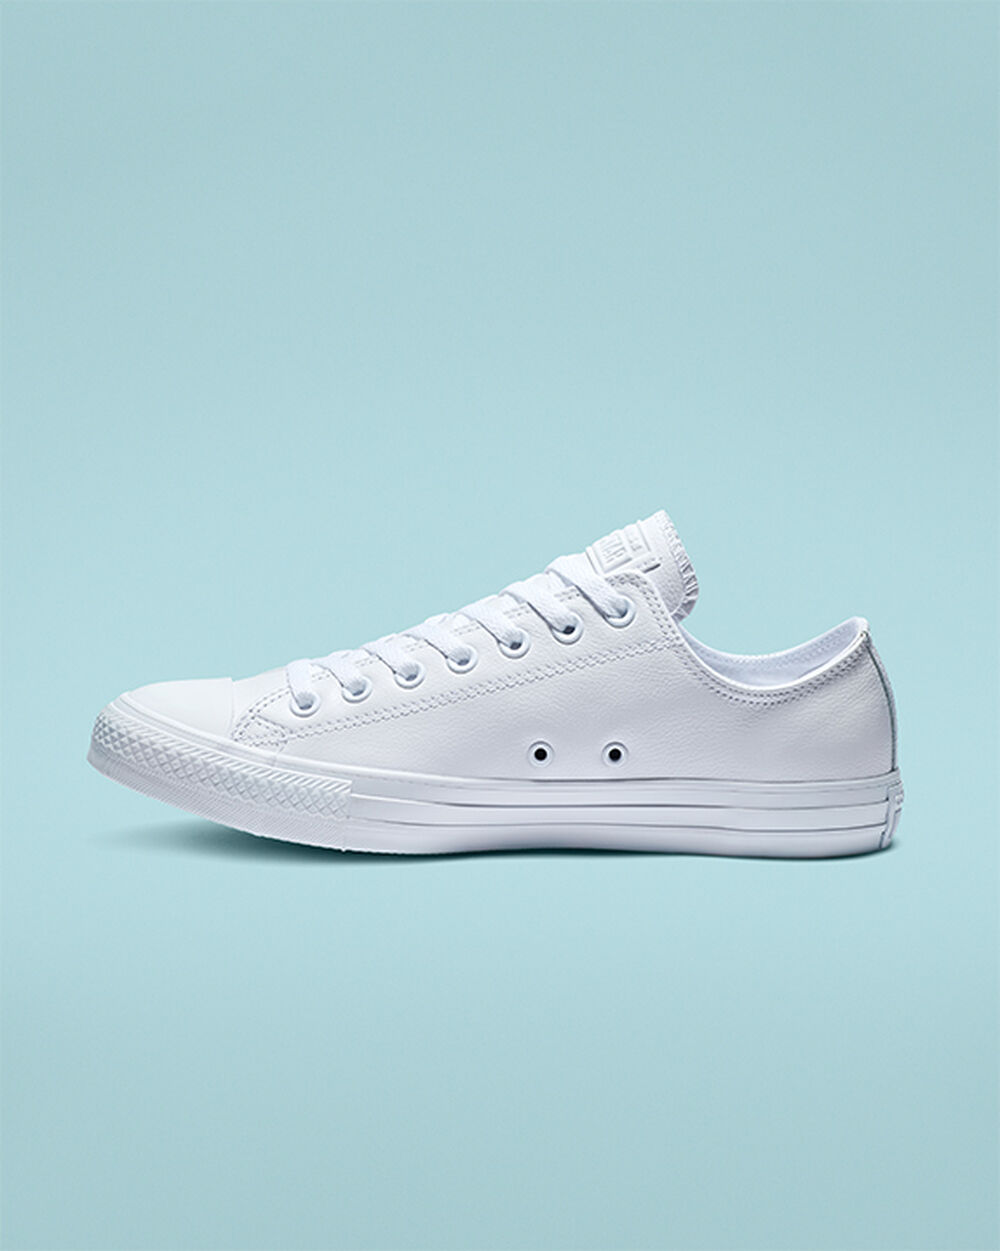 Tenis Converse Chuck Taylor All Star Mujer Blancos | Mexico-04616